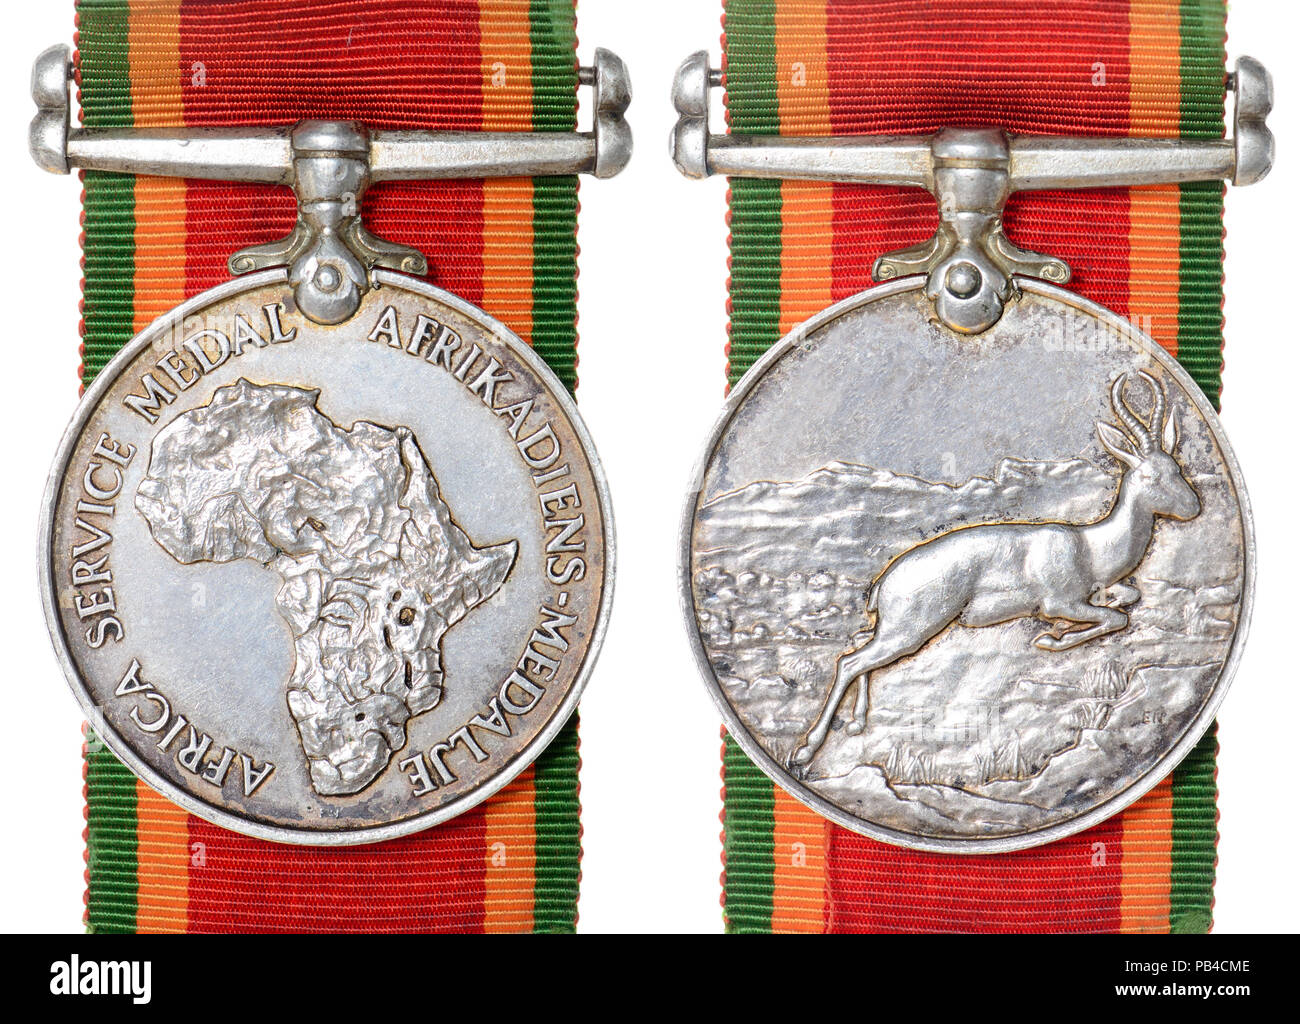 The Africa Service Medal: South African campaign medal for service during the Second World War, awarded to members of the Union Defence Forces, the So Stock Photo